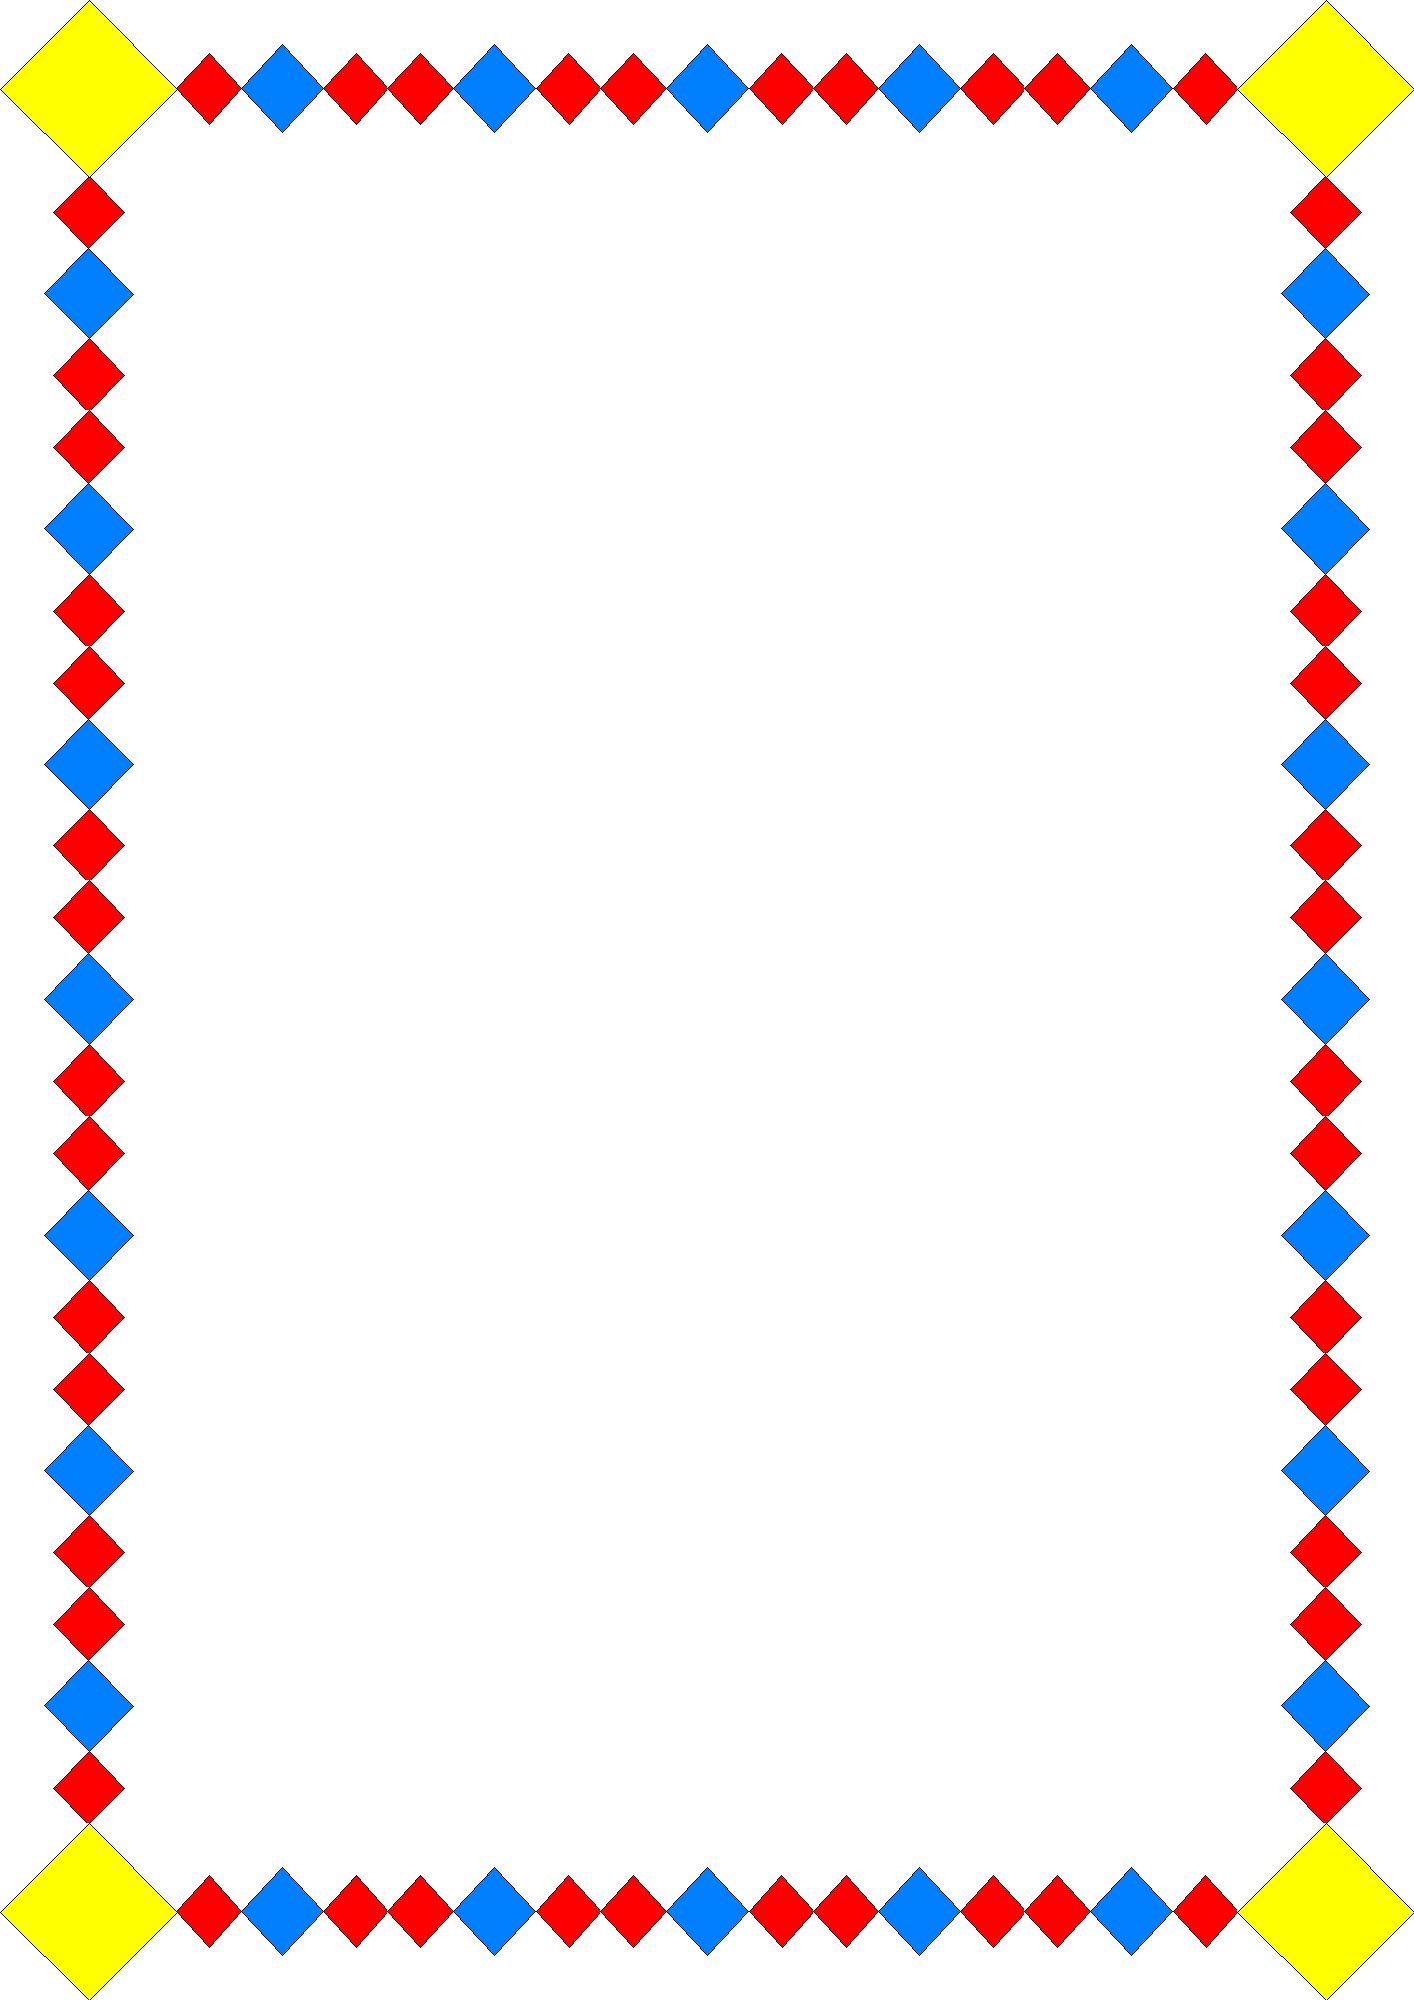 Clipart frame borders free